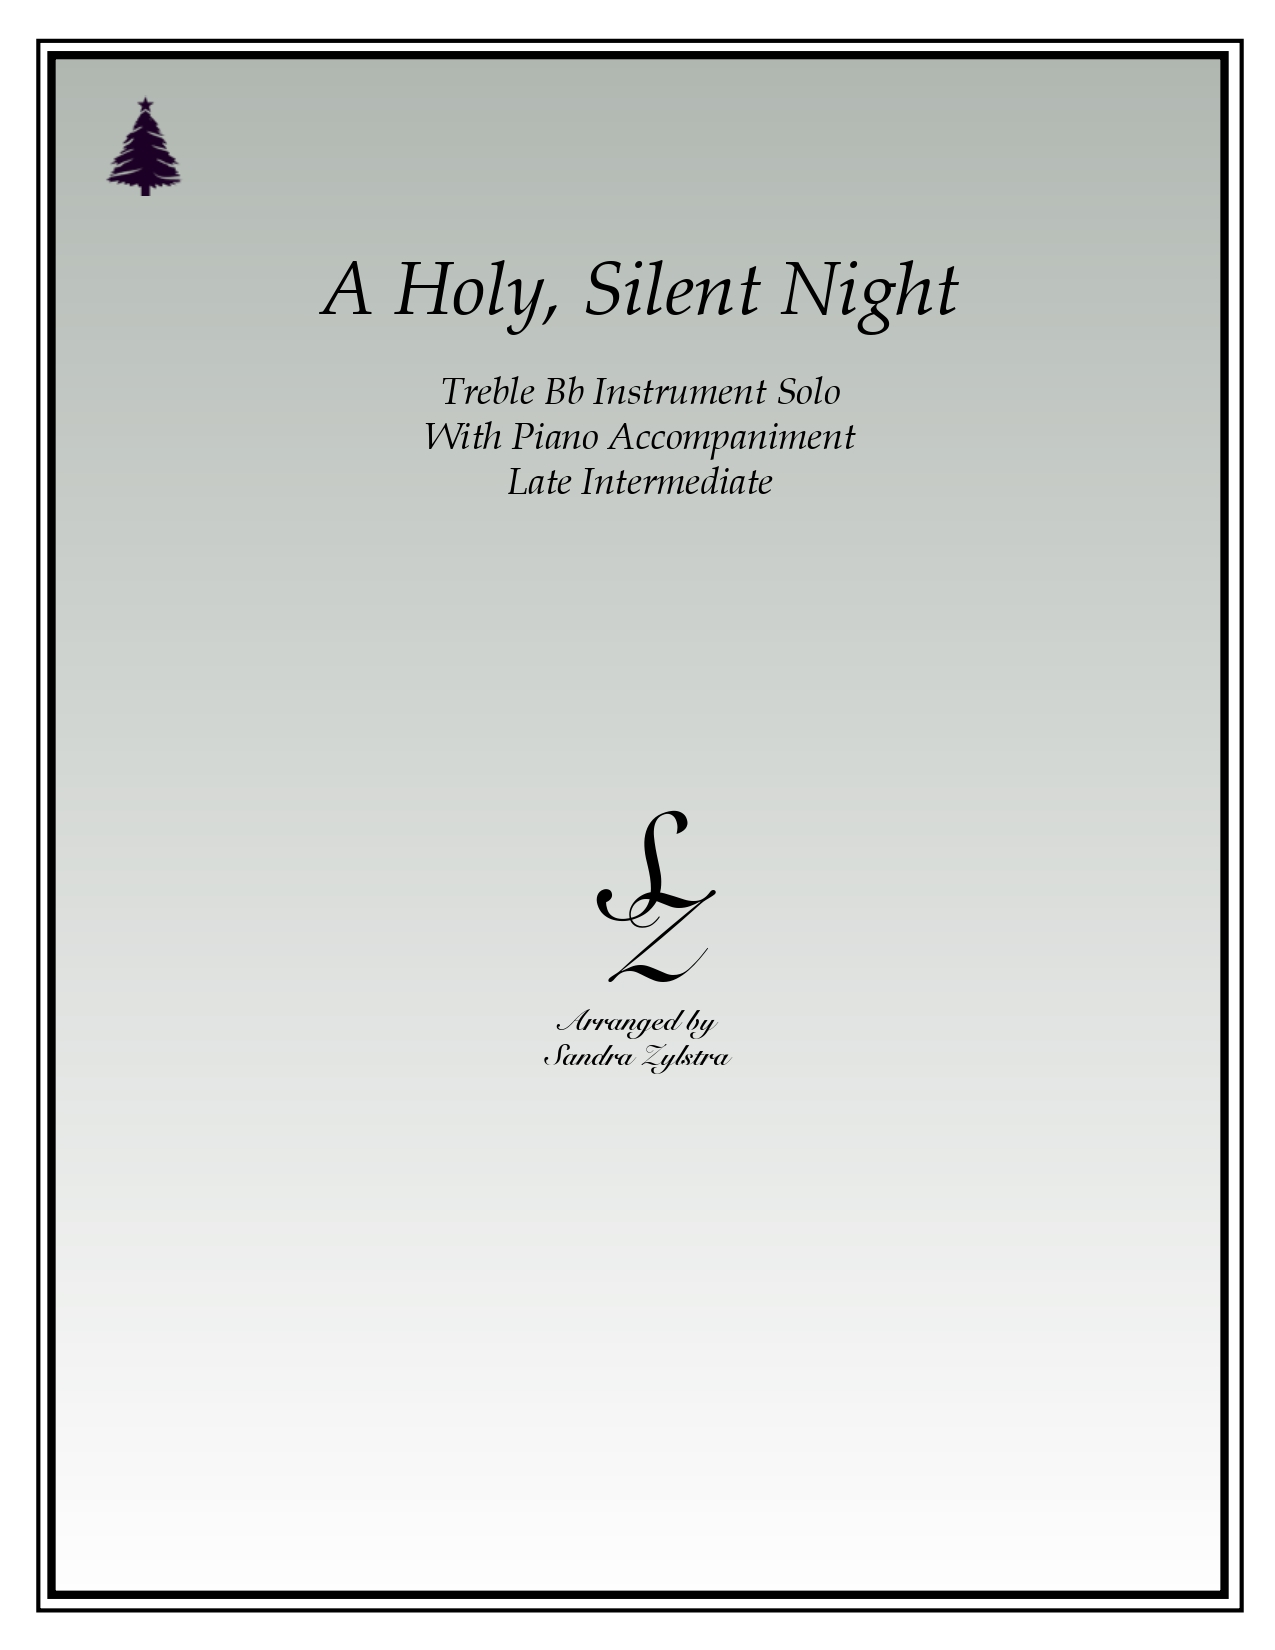 A Holy Silent Night Bb instrument solo part cover page 00011